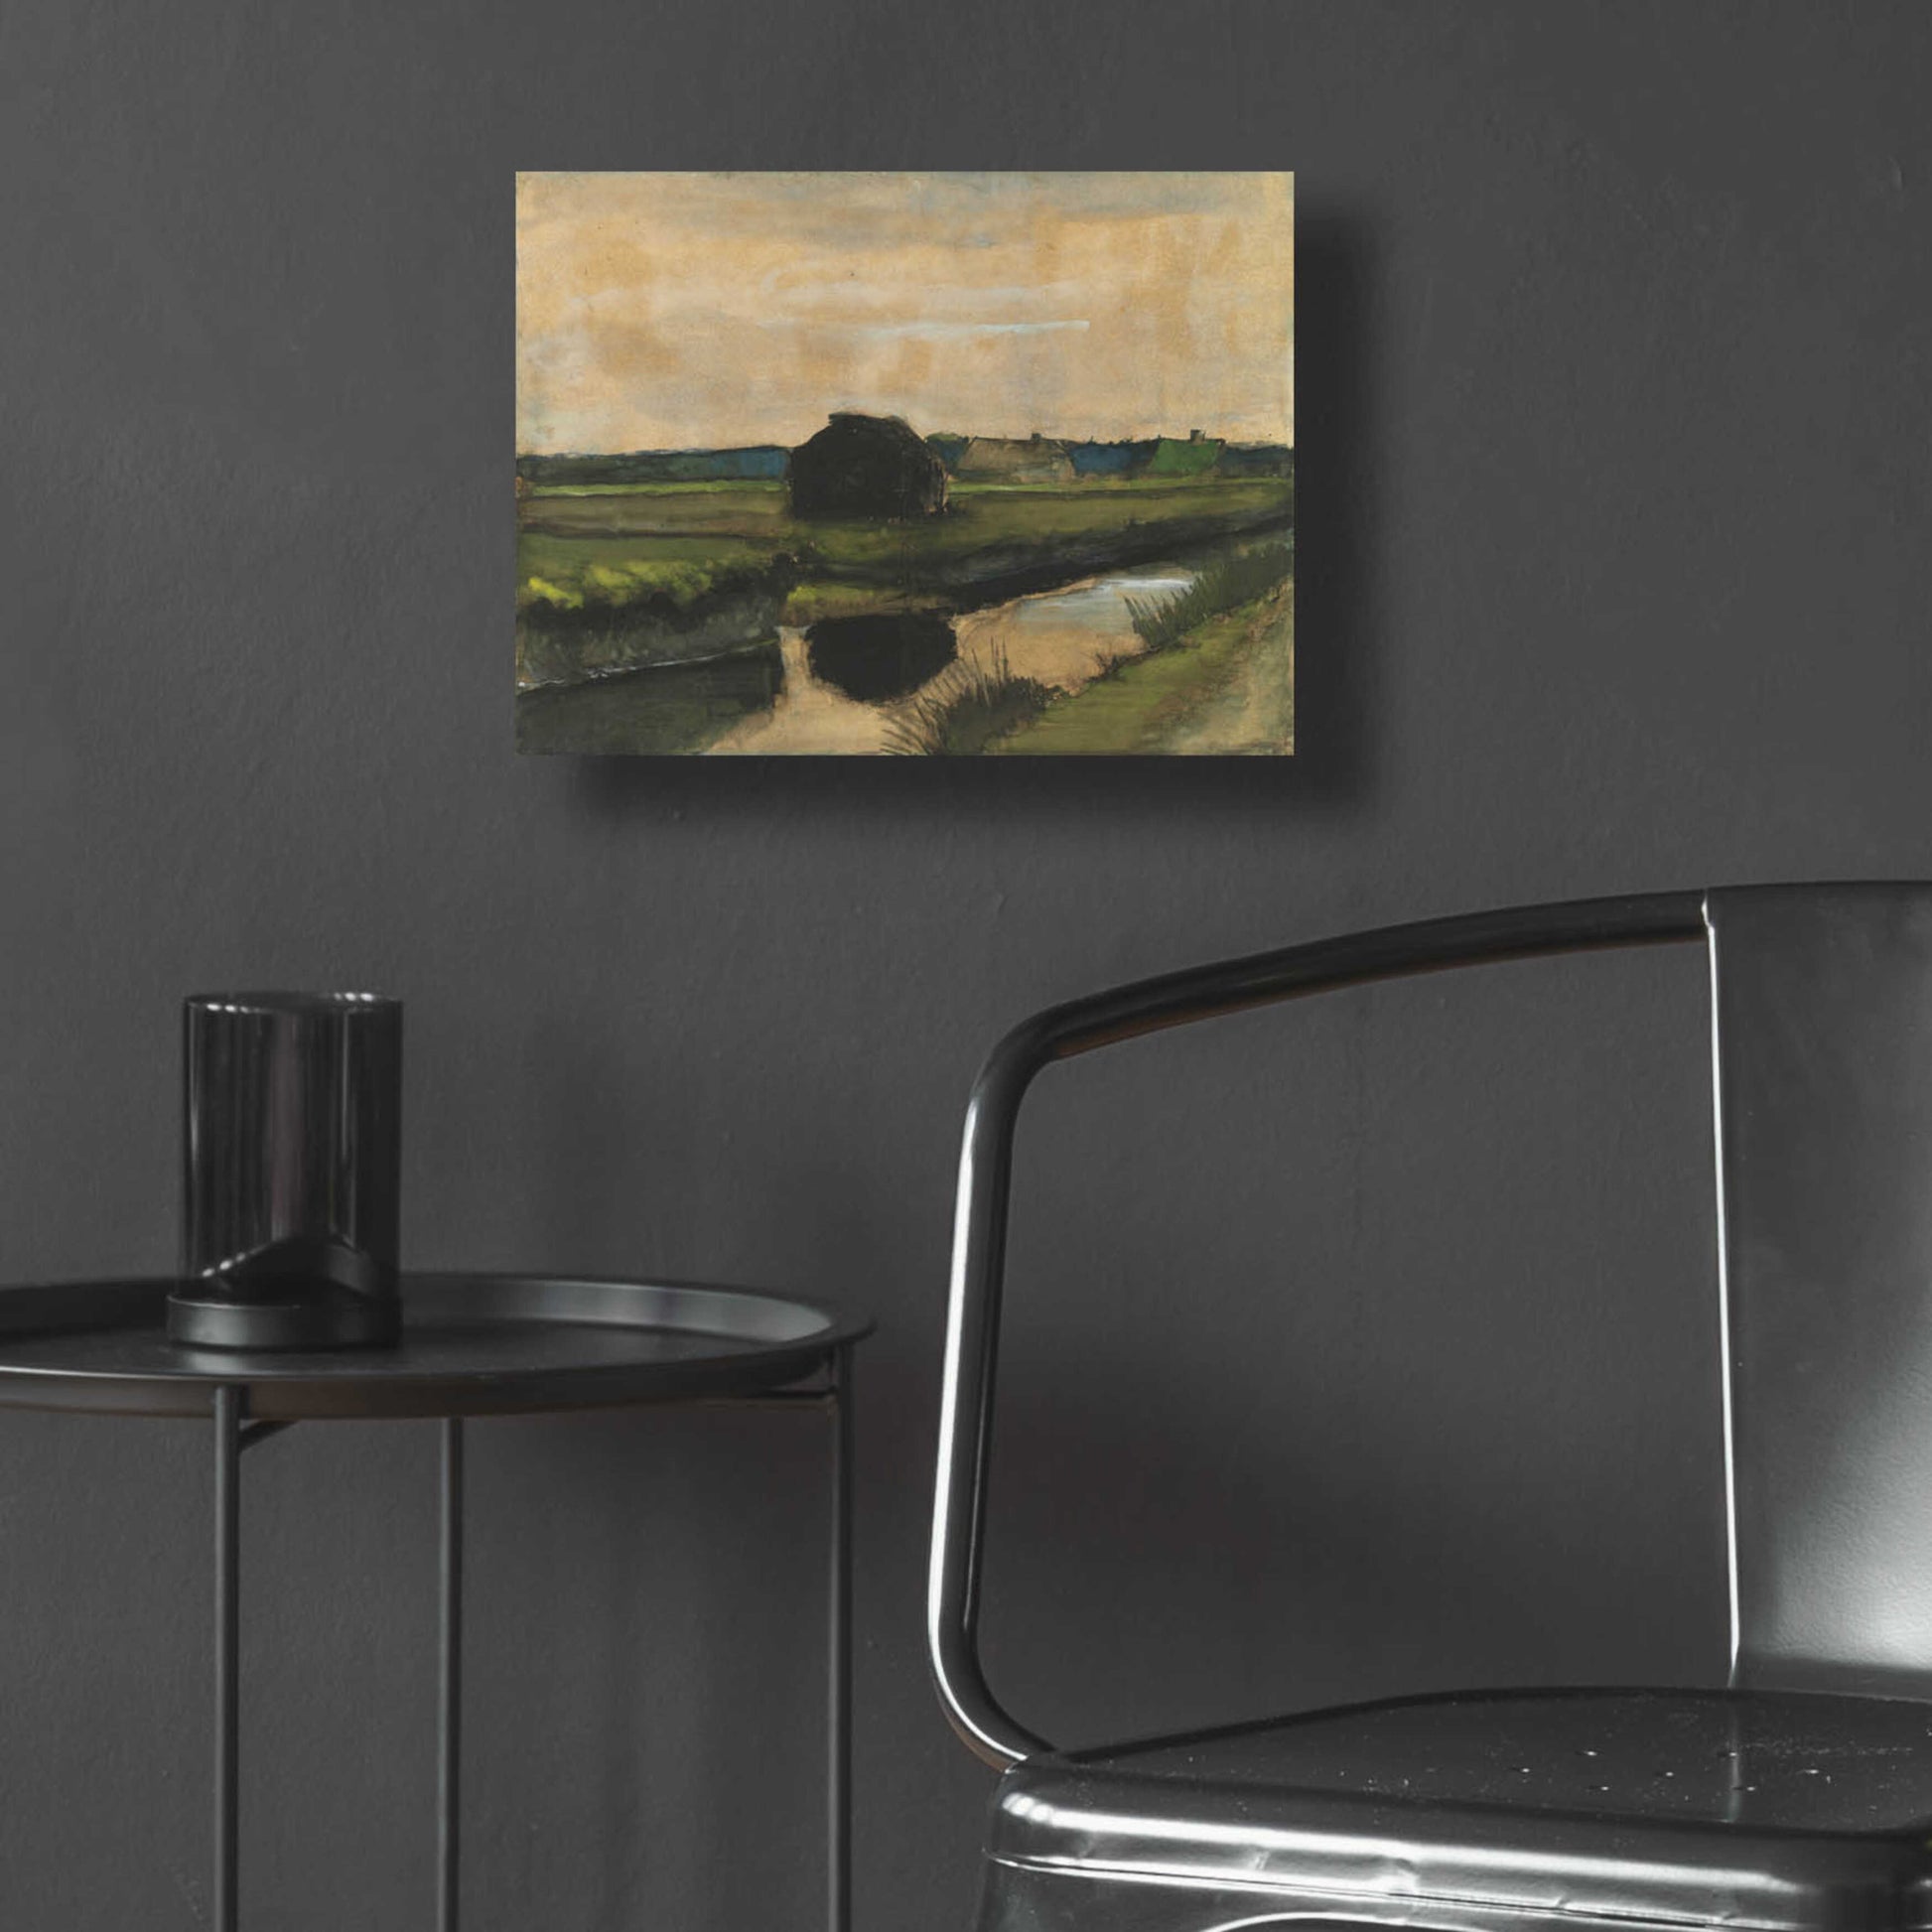 Epic Art 'Landscape With A Stack Of Peat And Farmhouses' by Vincent Van Gogh, Acrylic Glass Wall Art,16x12